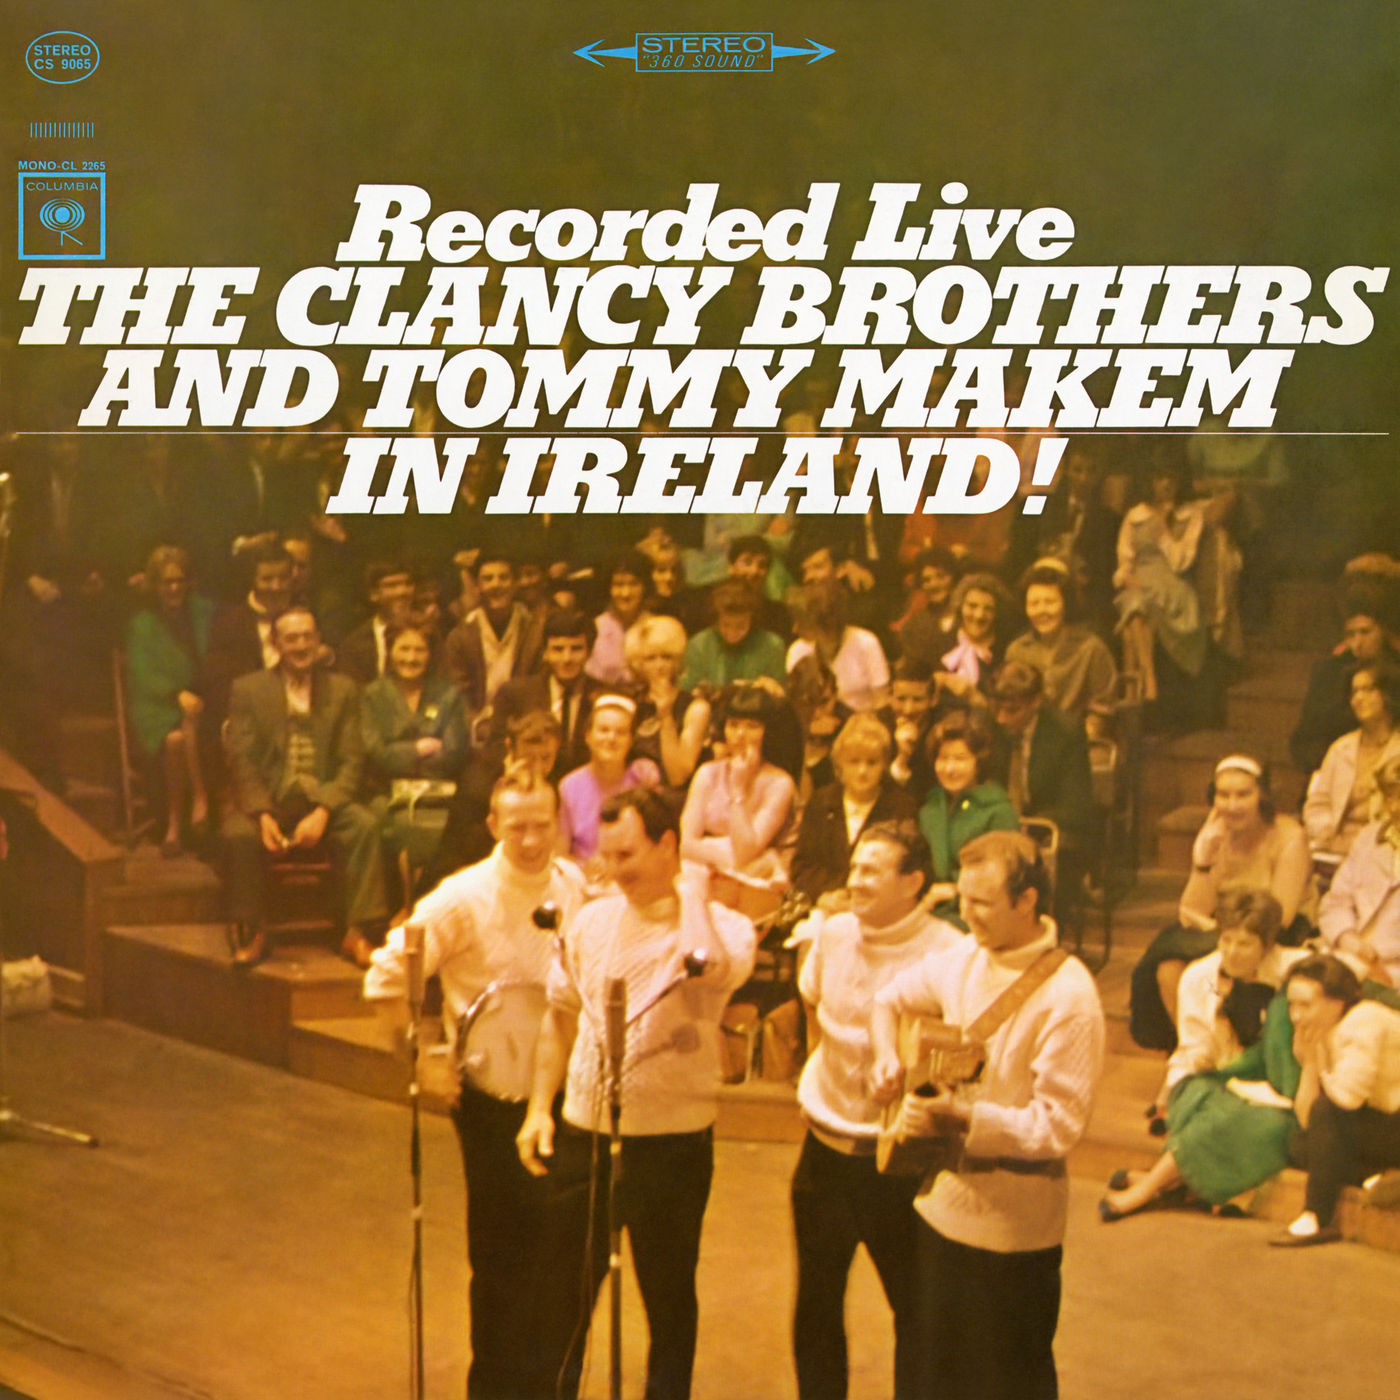 The Clancy Brothers – Recorded Live In Ireland!